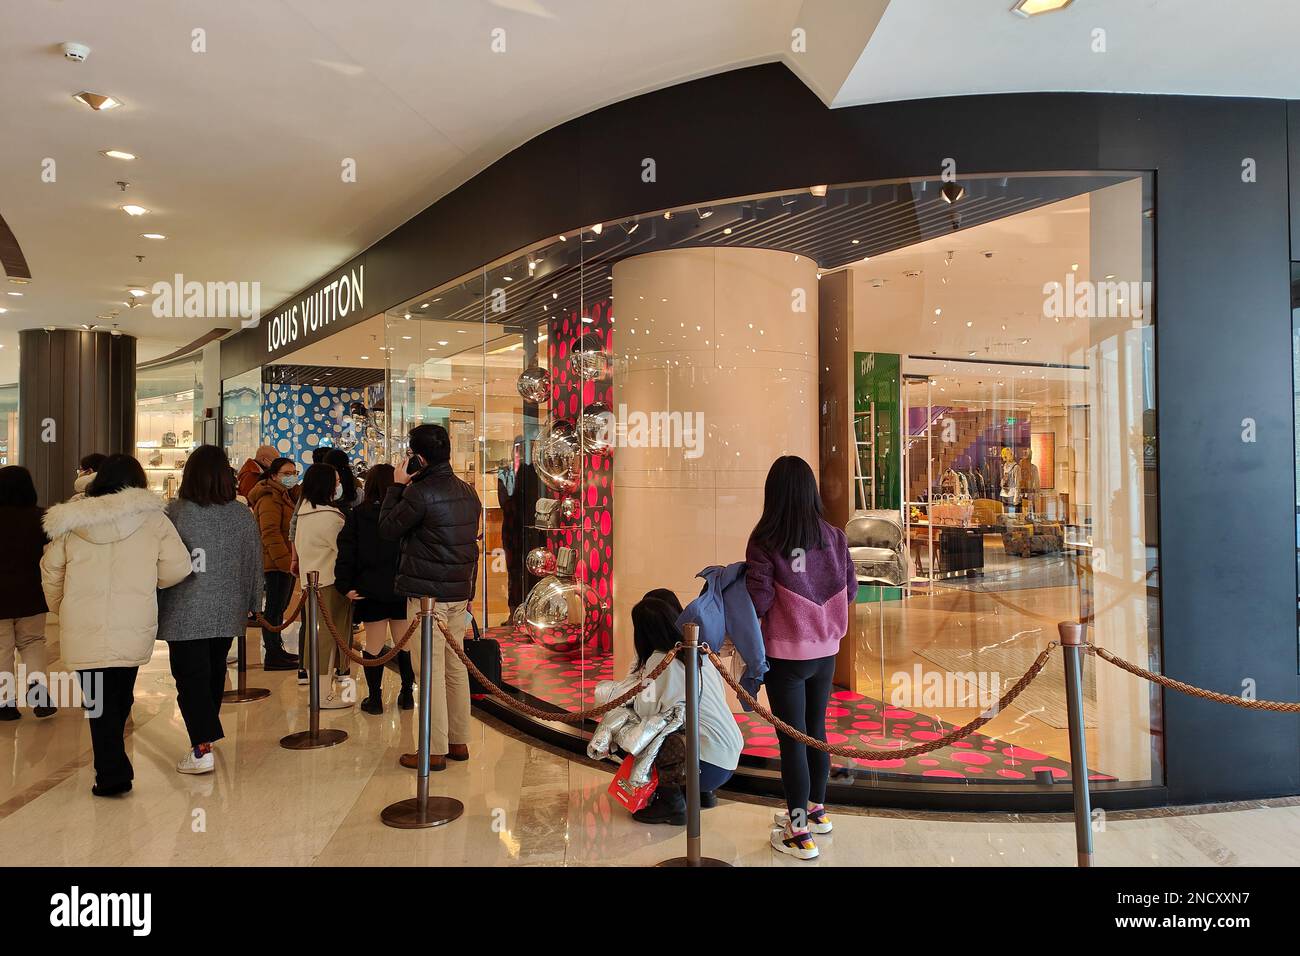 SHANGHAI, CHINA - FEBRUARY 15, 2023 - Customers line up in front of the Louis  Vuitton store at Huihenglong Plaza in Shanghai, China, on Feb 15, 2023.  Sources say Louis Vuitton may